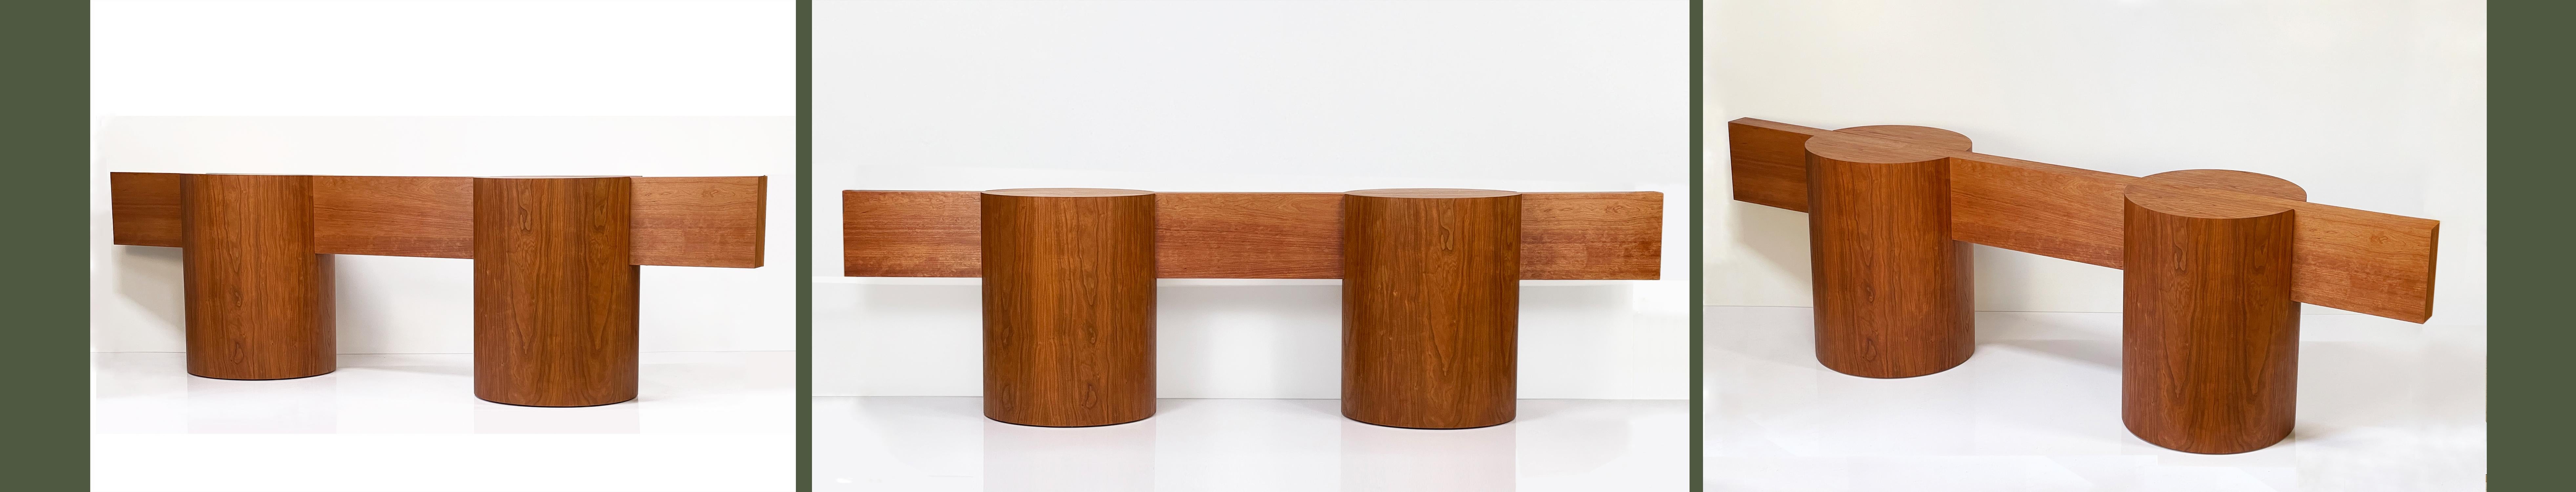 The kimono table features a very substantial tenon mortised into two large, round drums, shown here in American Cherry.
This 8' tenon is intended to support a top at least 10' in length.
All of William's pieces are made to order, and the Kimono may